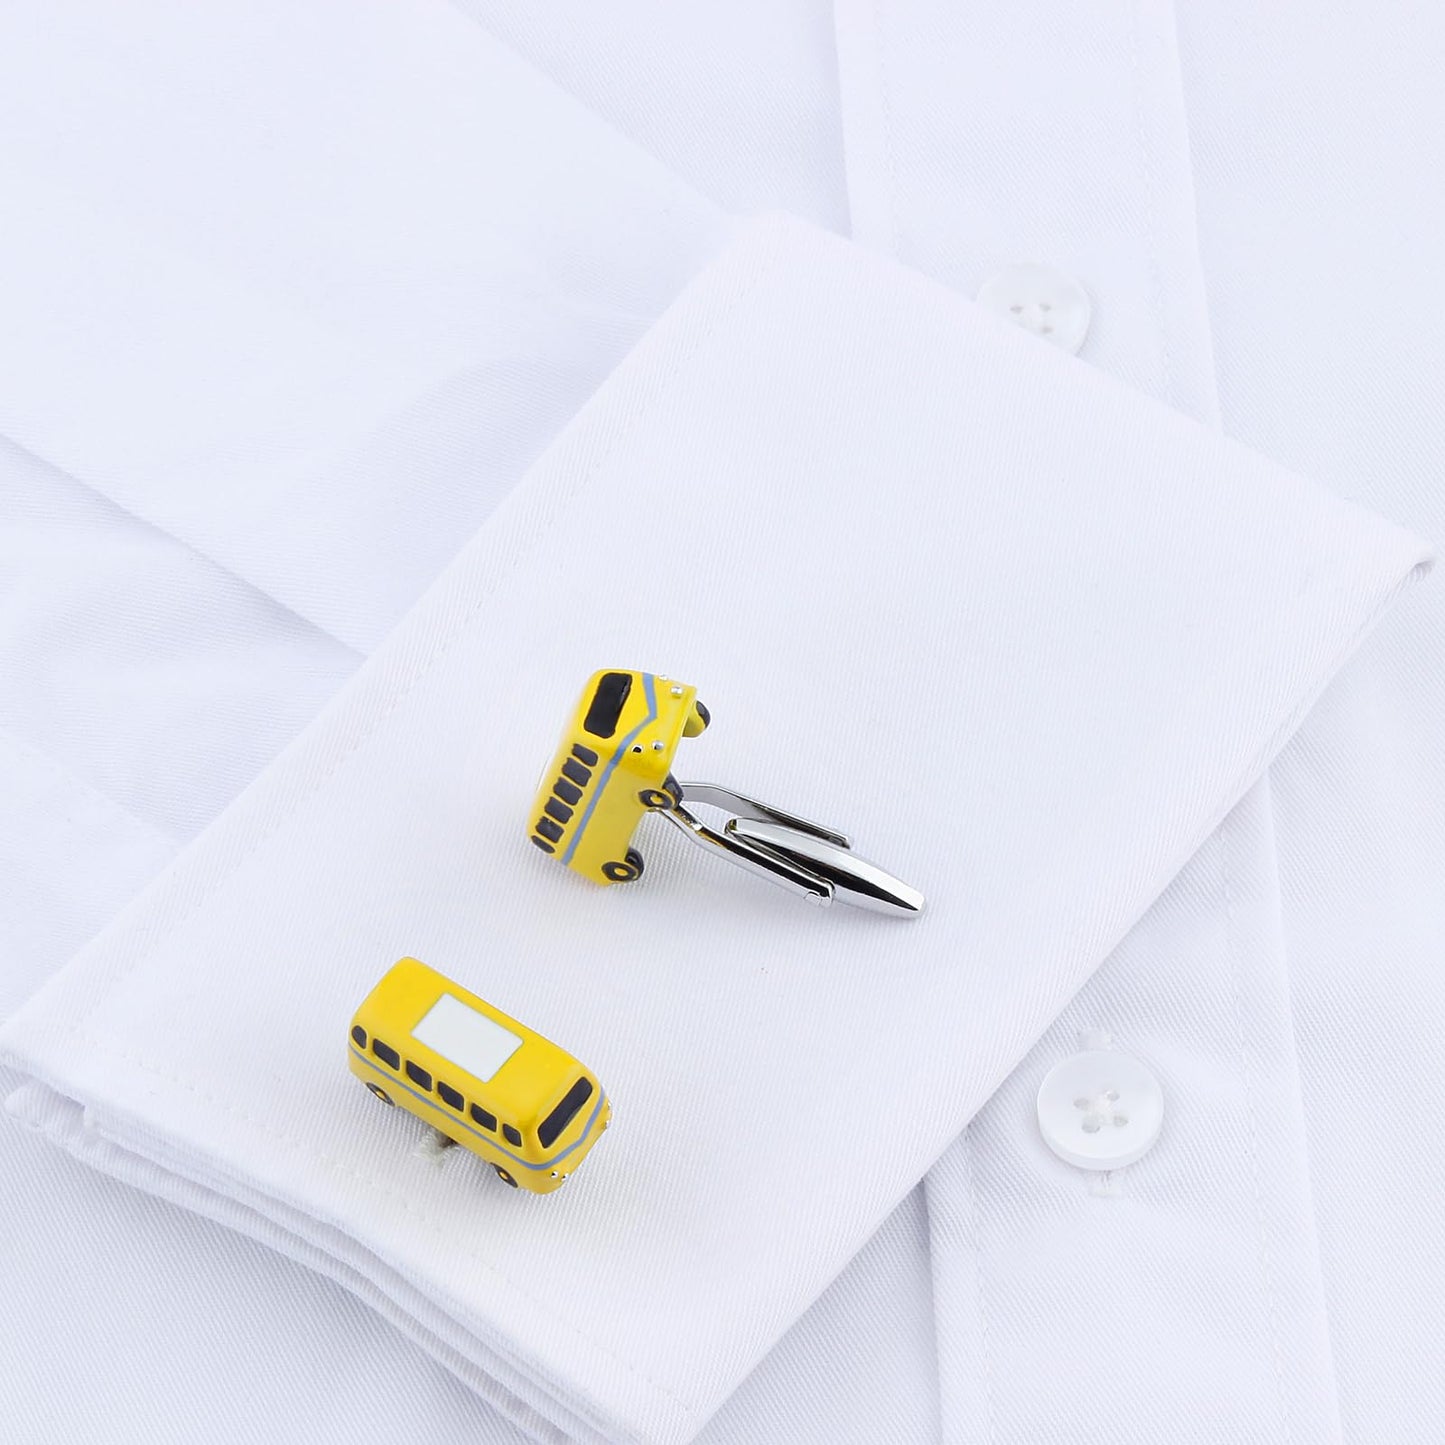 Bus Cuff links For Men With Gift Box.